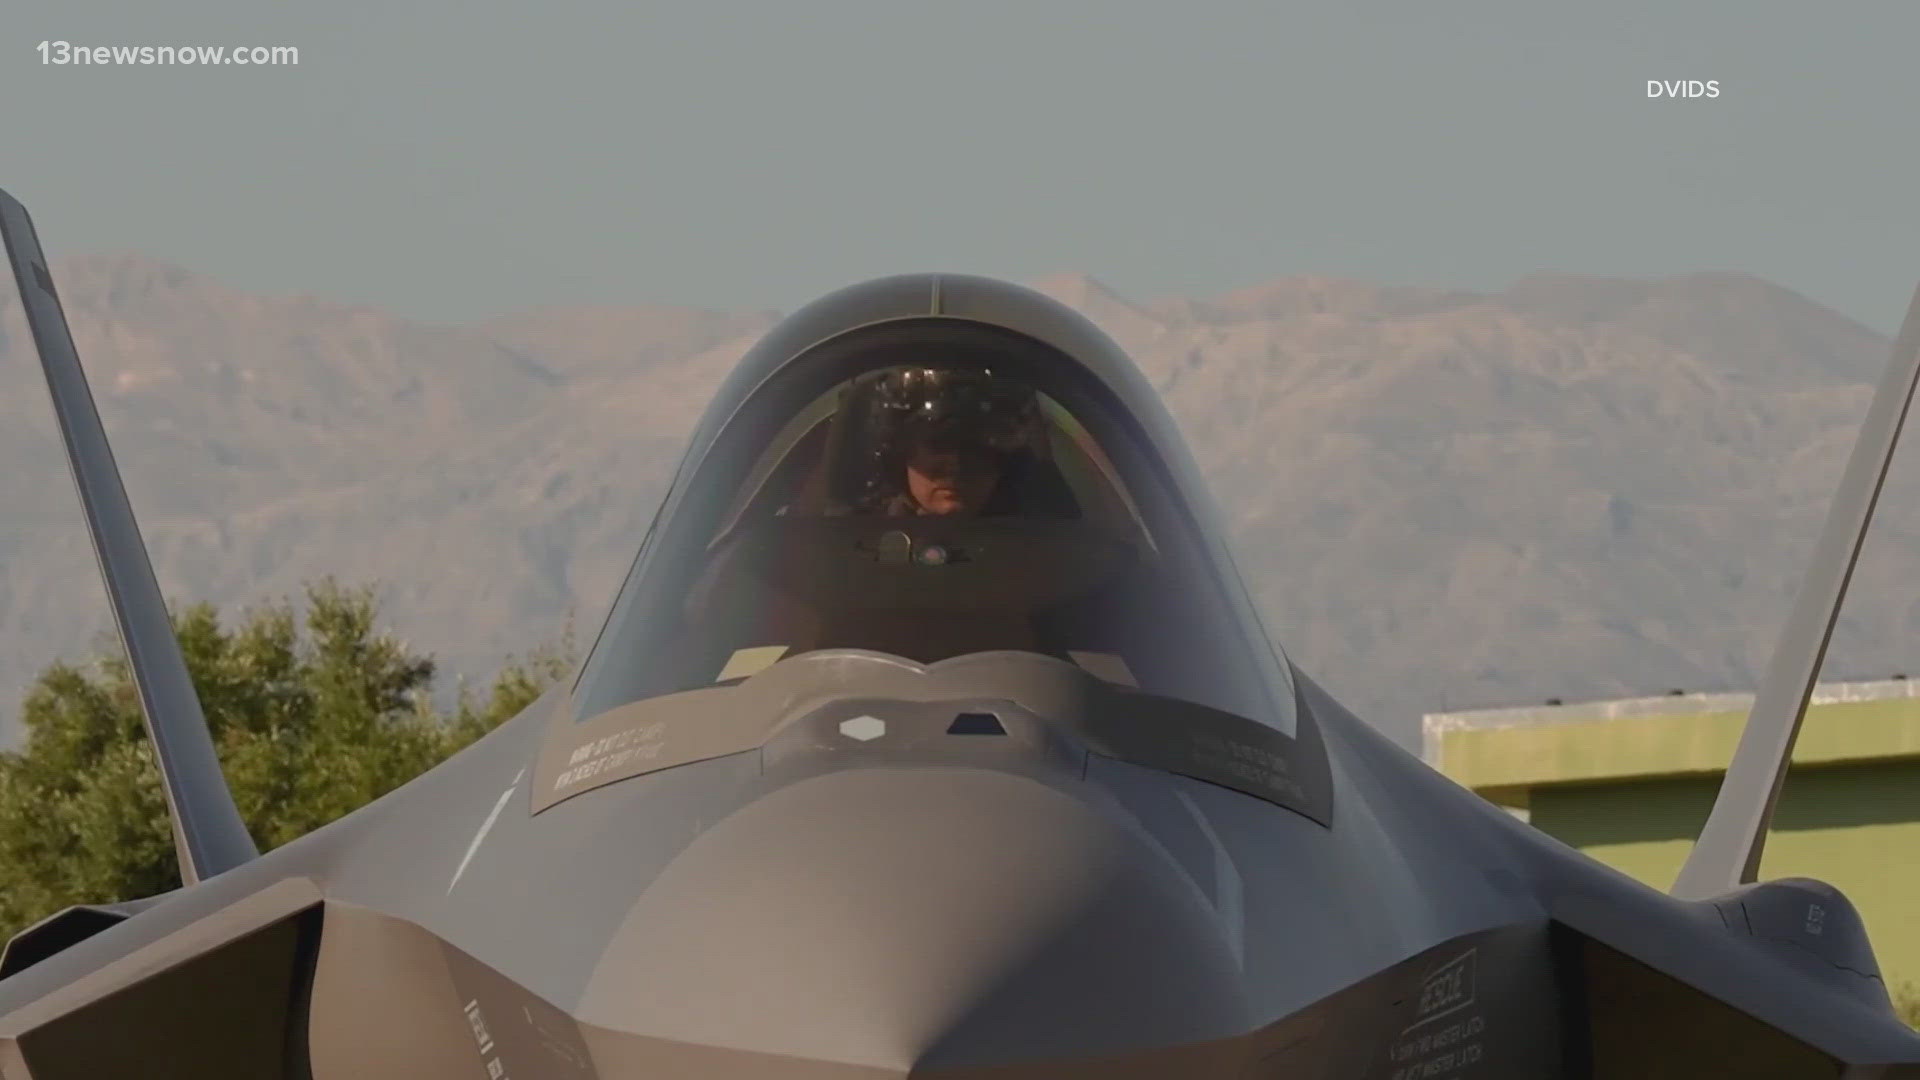 The F-35 fighter jet has been plagued for two decades by rising costs and delays.